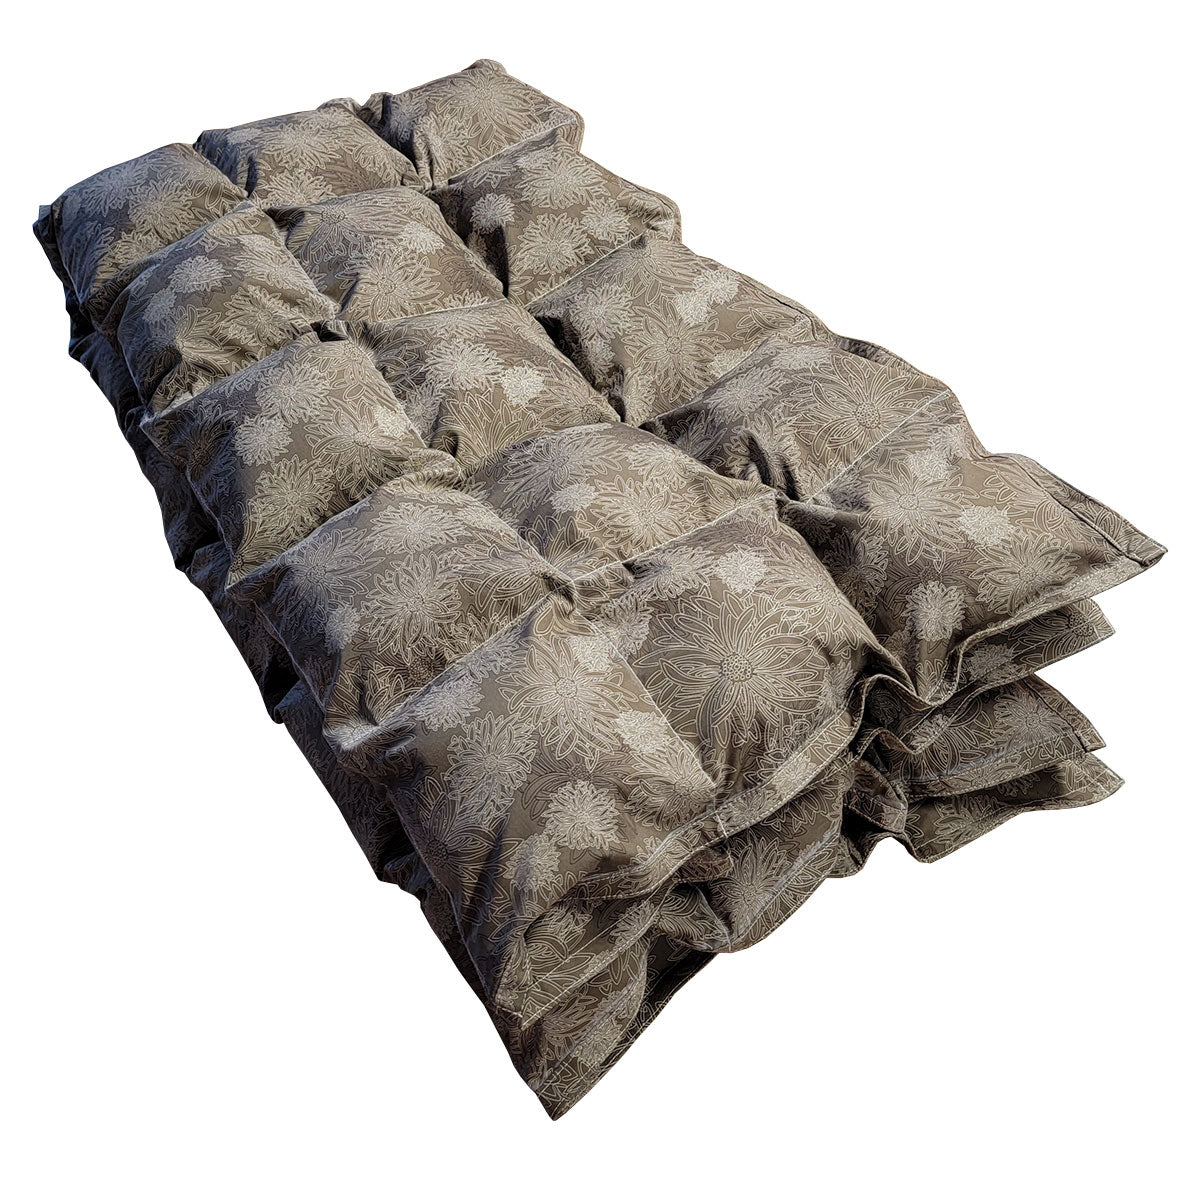 Weighted Blanket - Floral Olive